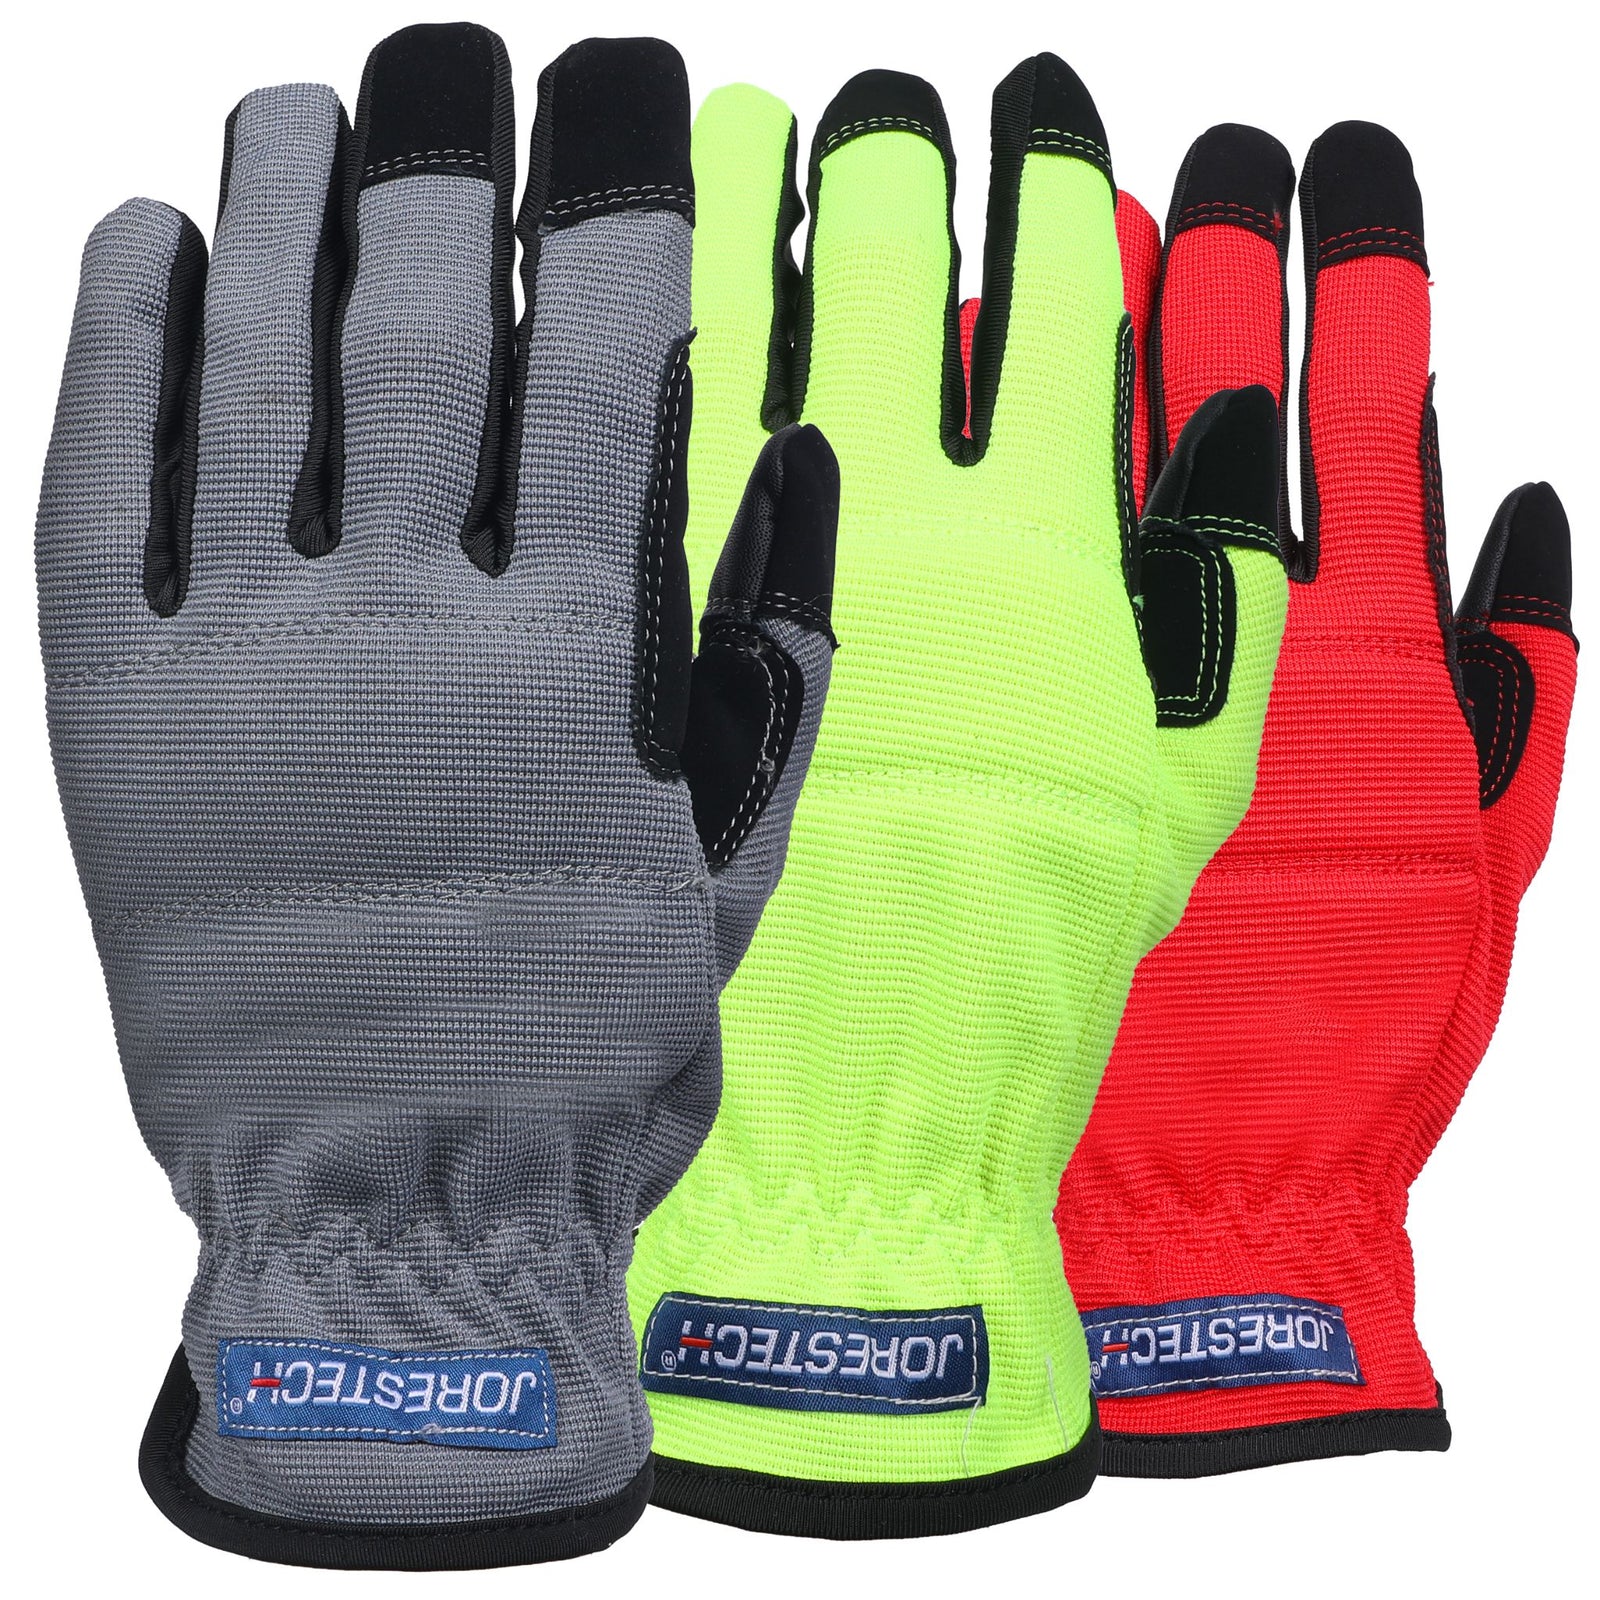 3 touchscreen safety work gloves of different colors that are included in the kit of 3 pairs. Colors are red, yellow/lime, and gray